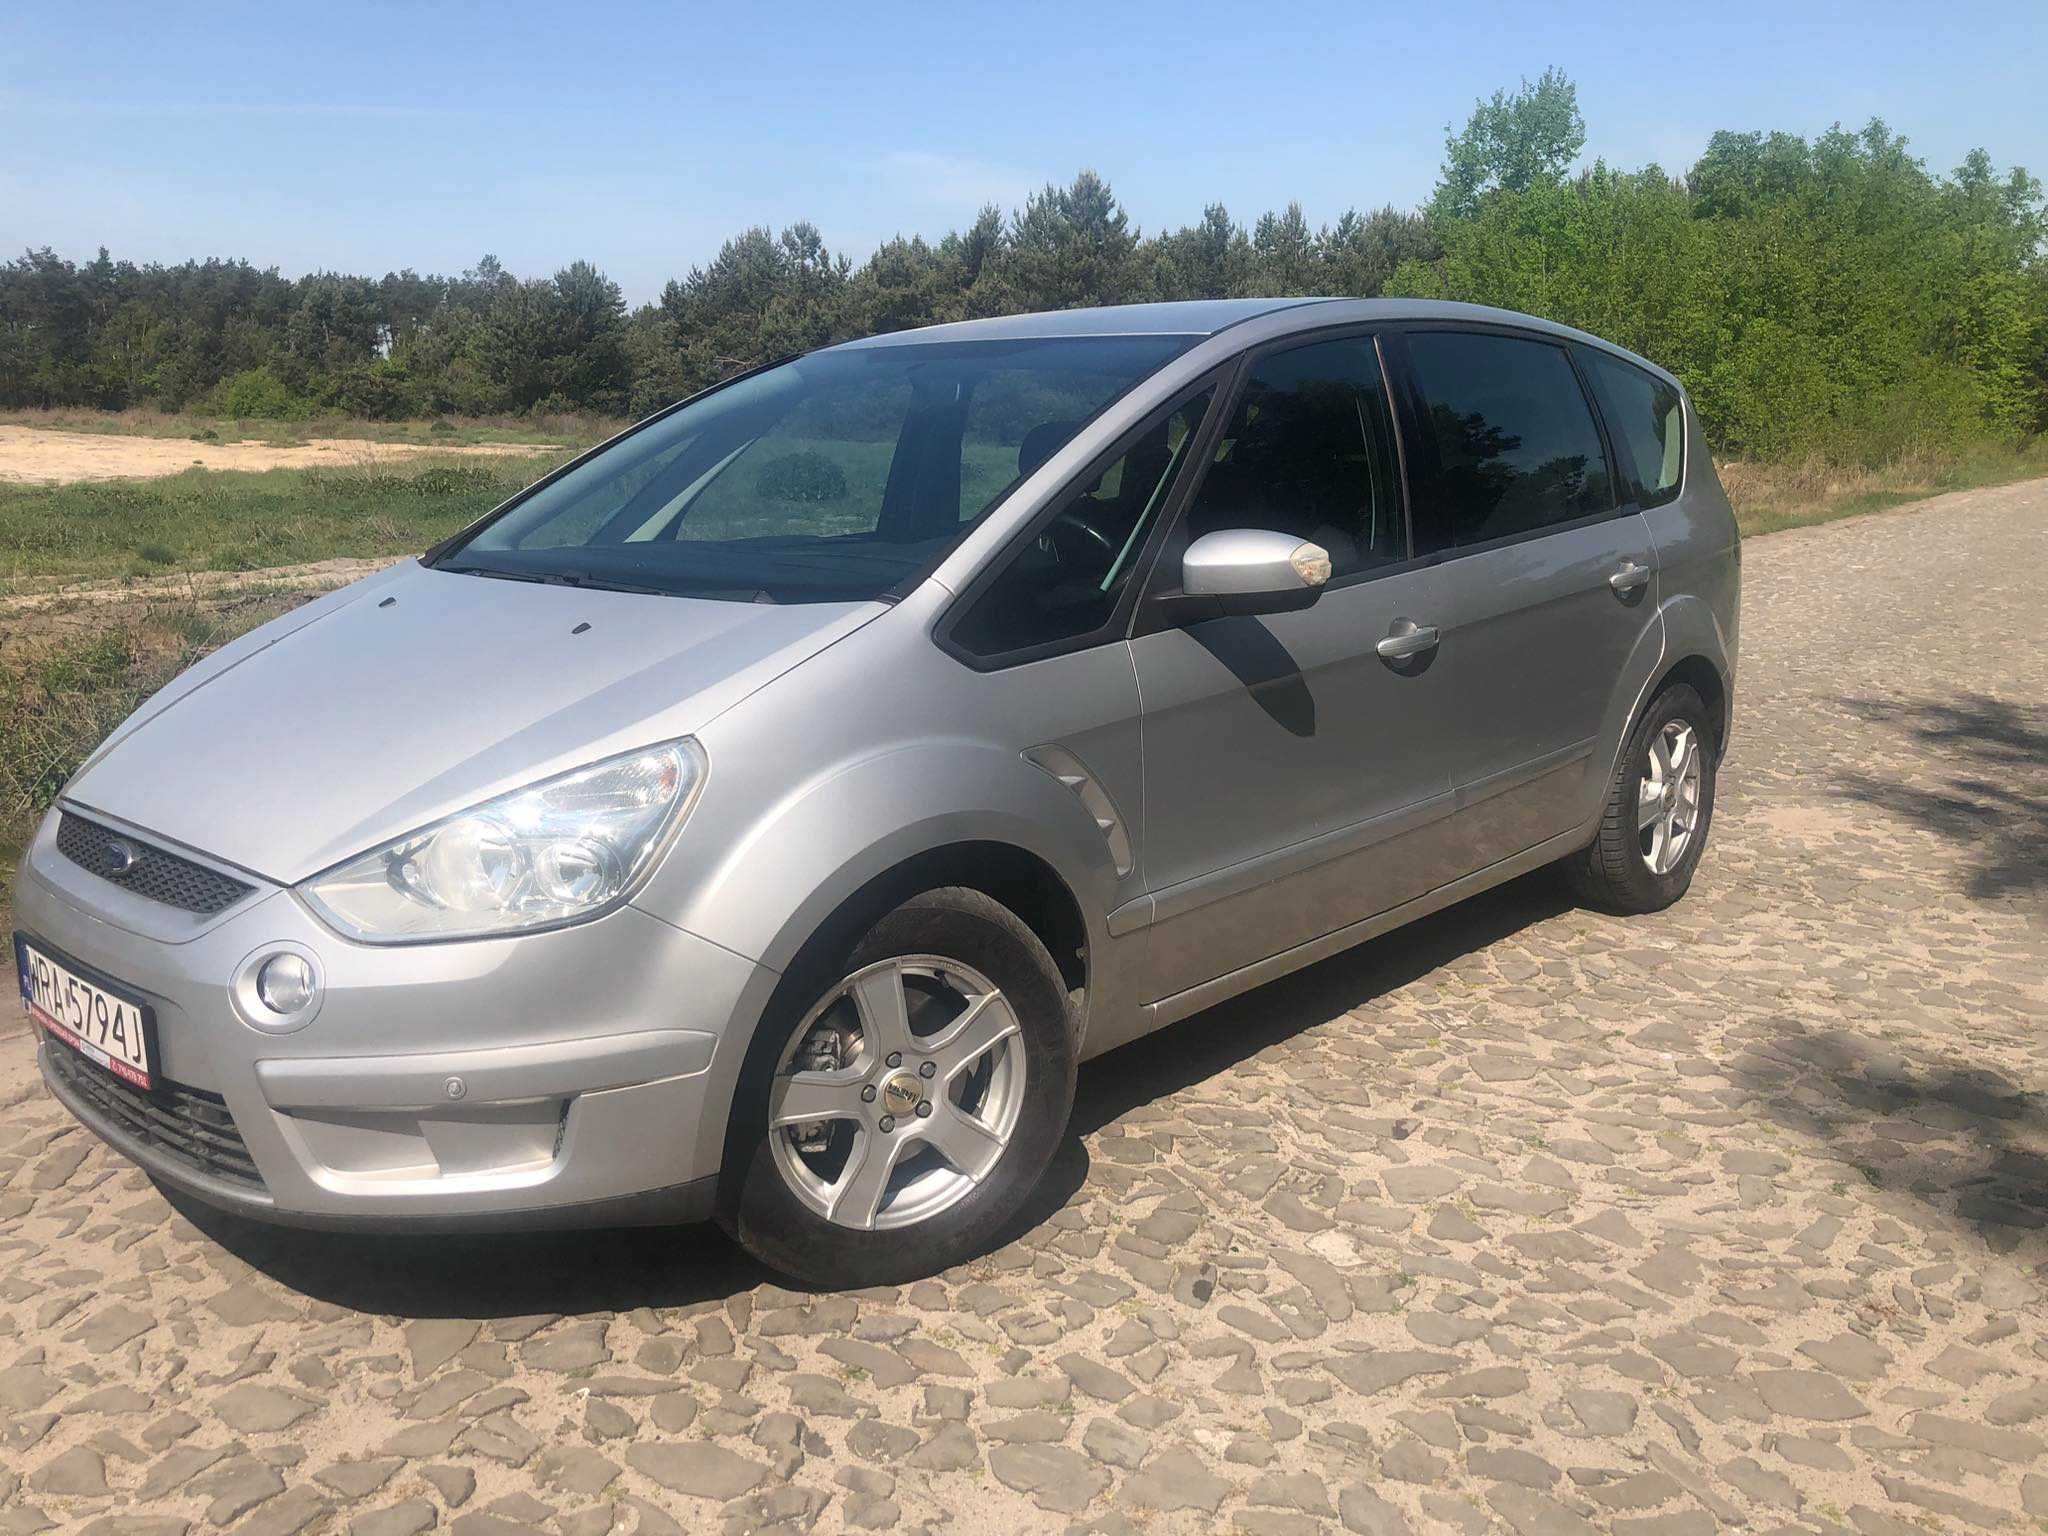 Ford S-max 2.0 benzyna 145km